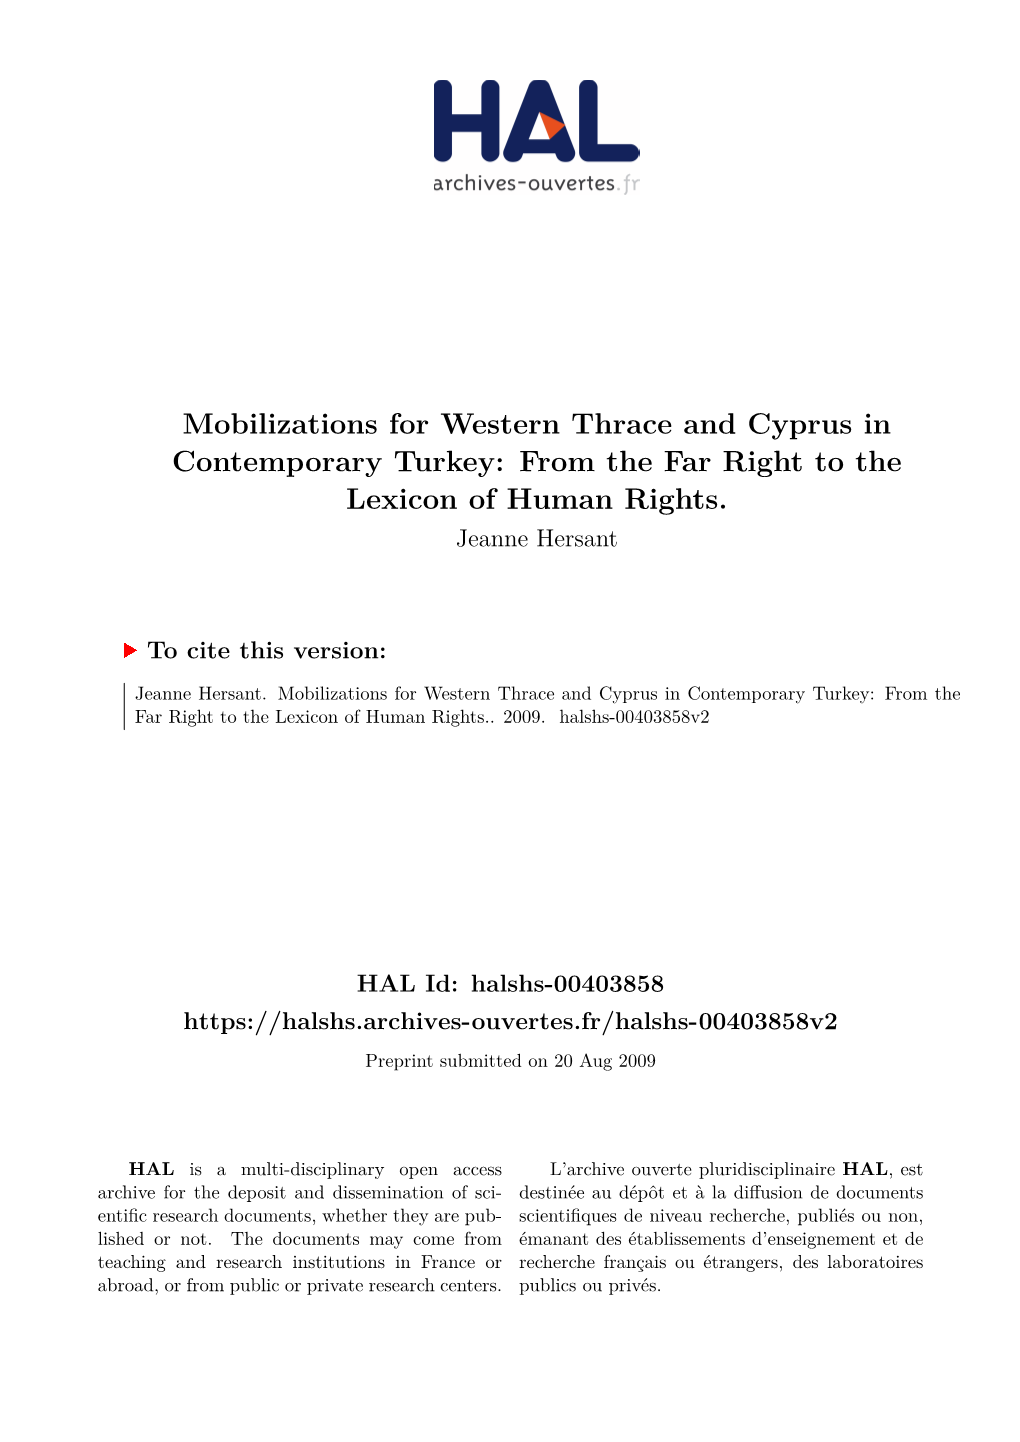 Mobilizations for Western Thrace and Cyprus in Contemporary Turkey: from the Far Right to the Lexicon of Human Rights